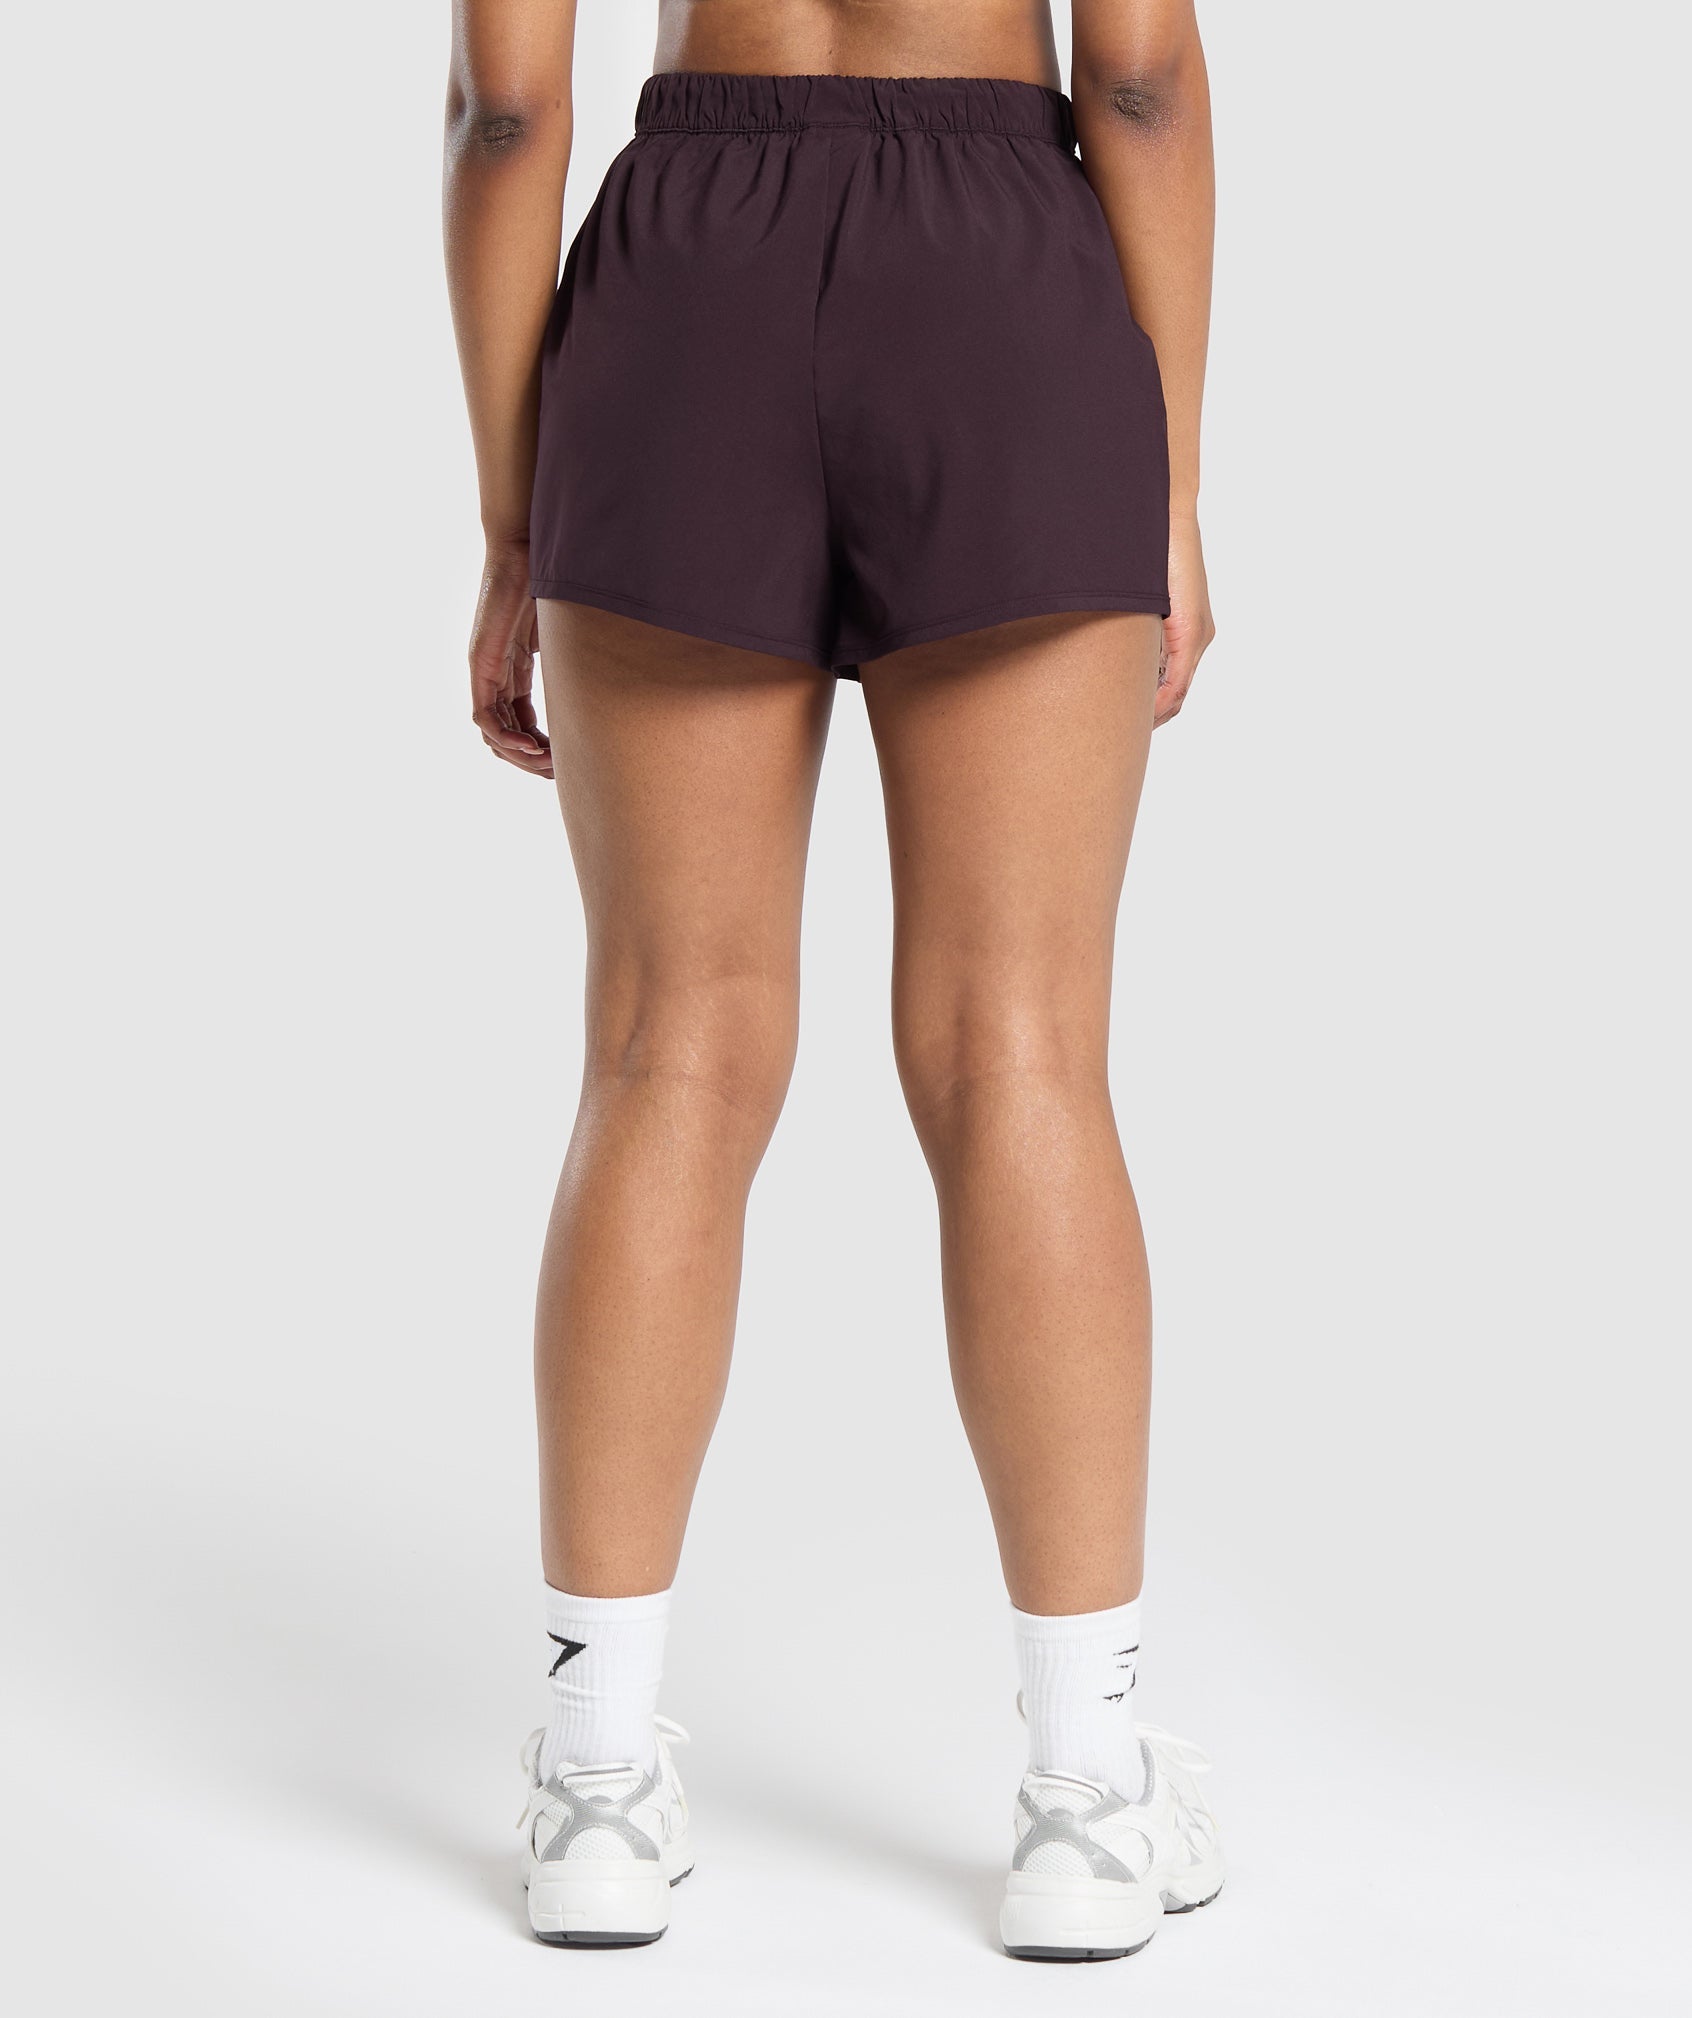 Scallop Hem Shaped Shorts in Plum Brown - view 6